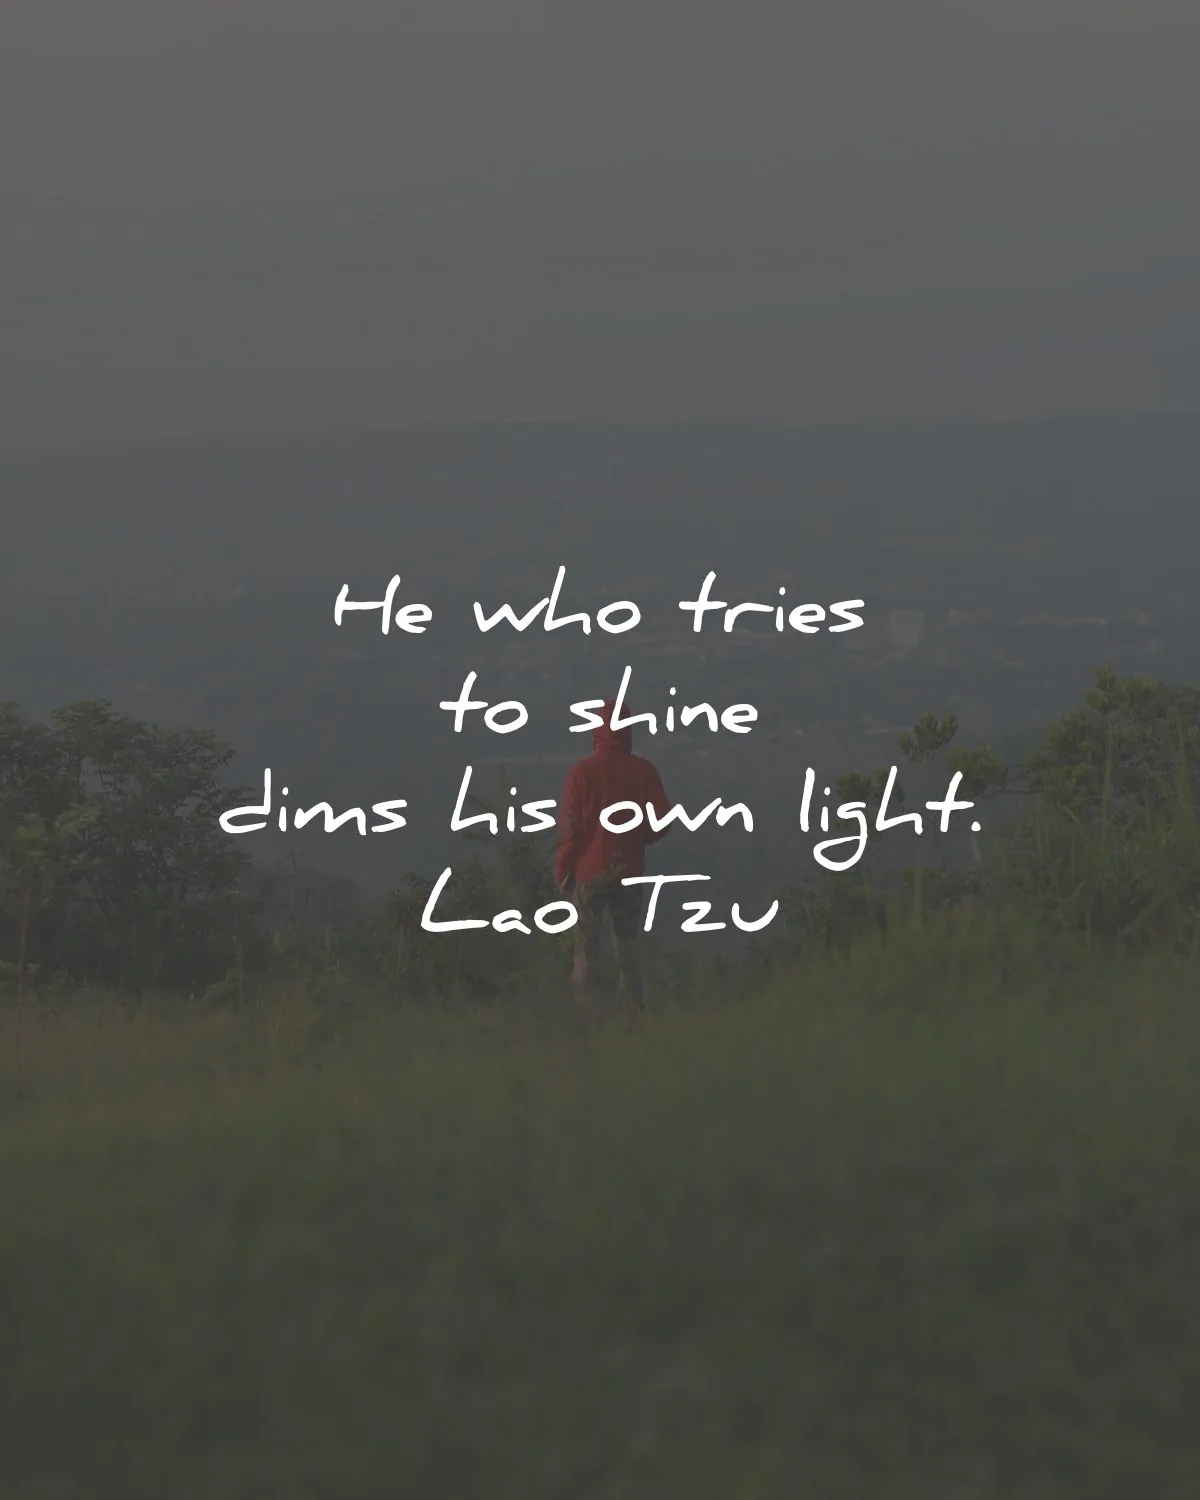 humility quotes who tries shine dims own light lao tzu wisdom